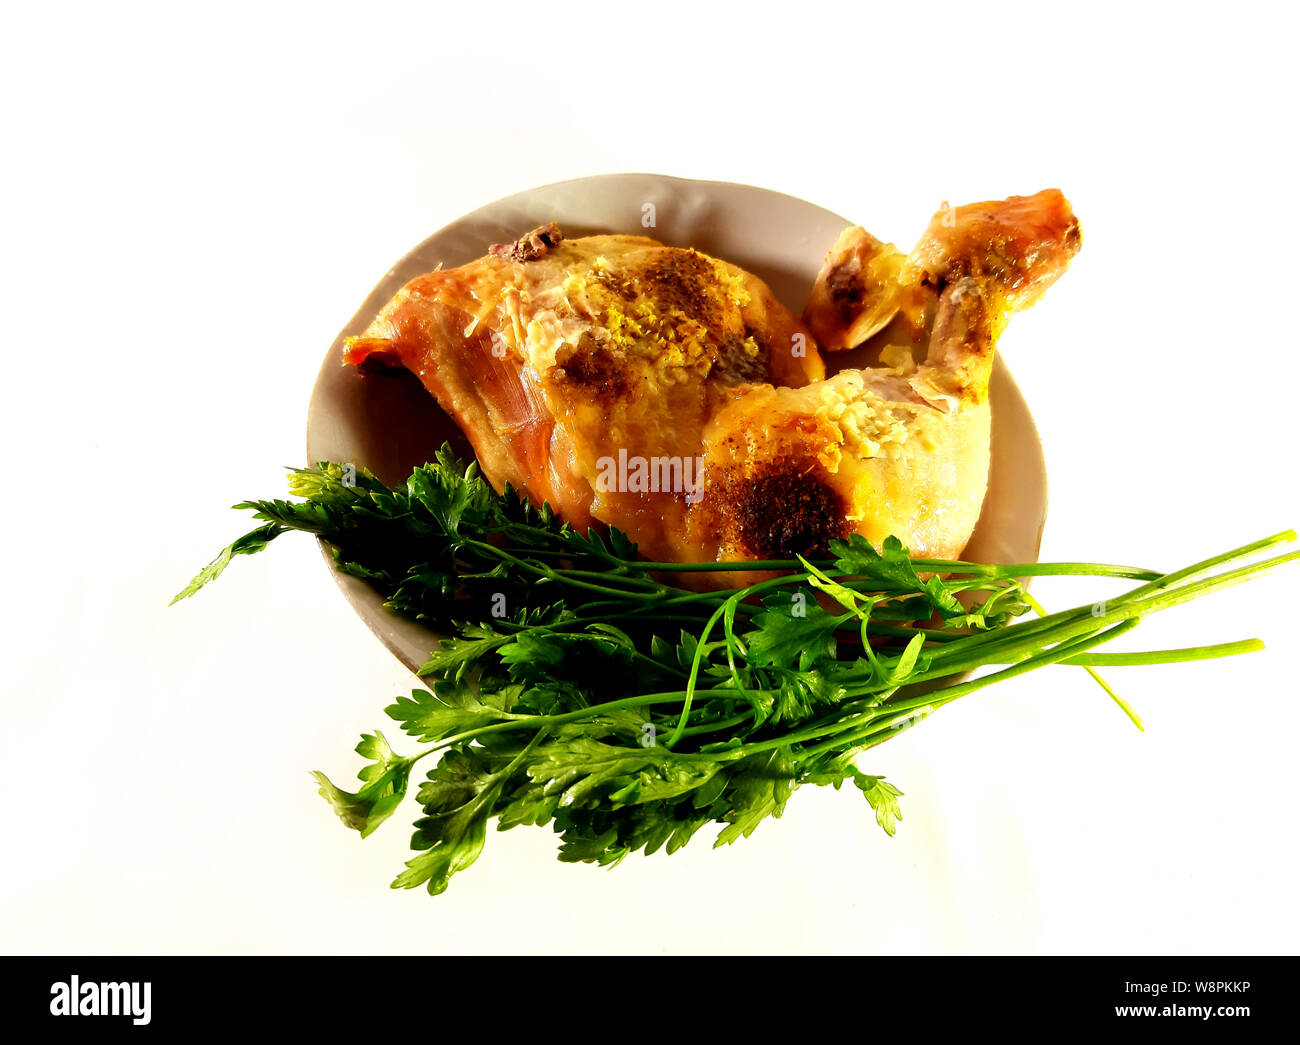 Fried chicken leg. Tasty food. Hearty poultry meat. Stock Photo